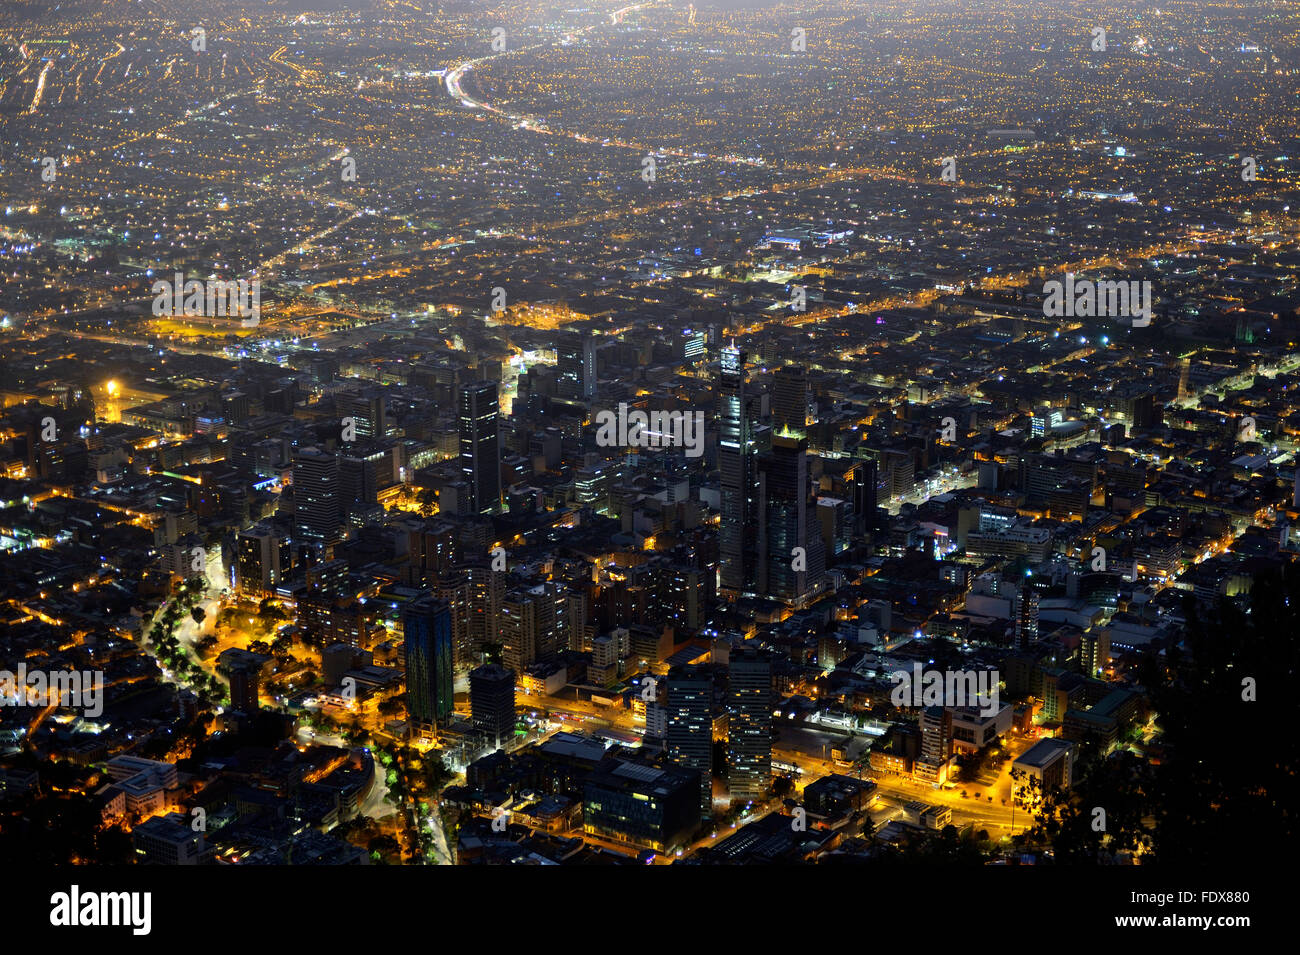 City centre, Central Business District, at night, view from Cerro Monserrate, Bogotá, Colombia Stock Photo